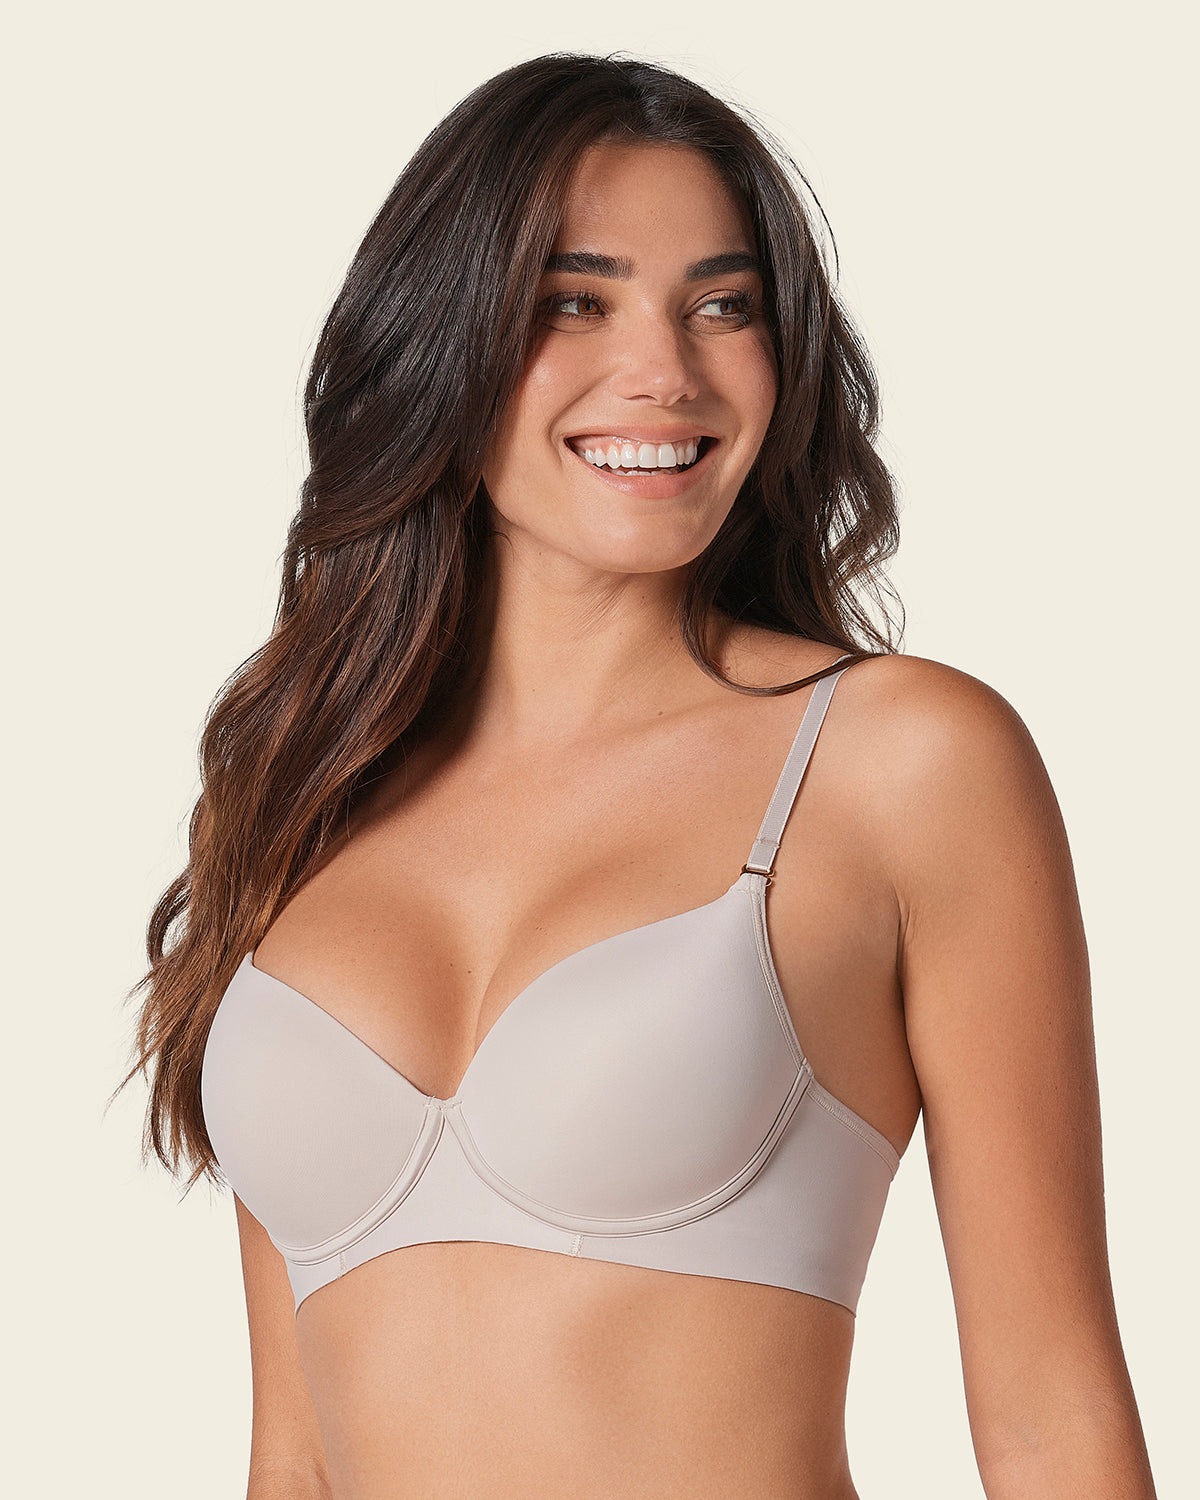 Shop Push Up Bra For Flat Boobs 32a Cup A with great discounts and